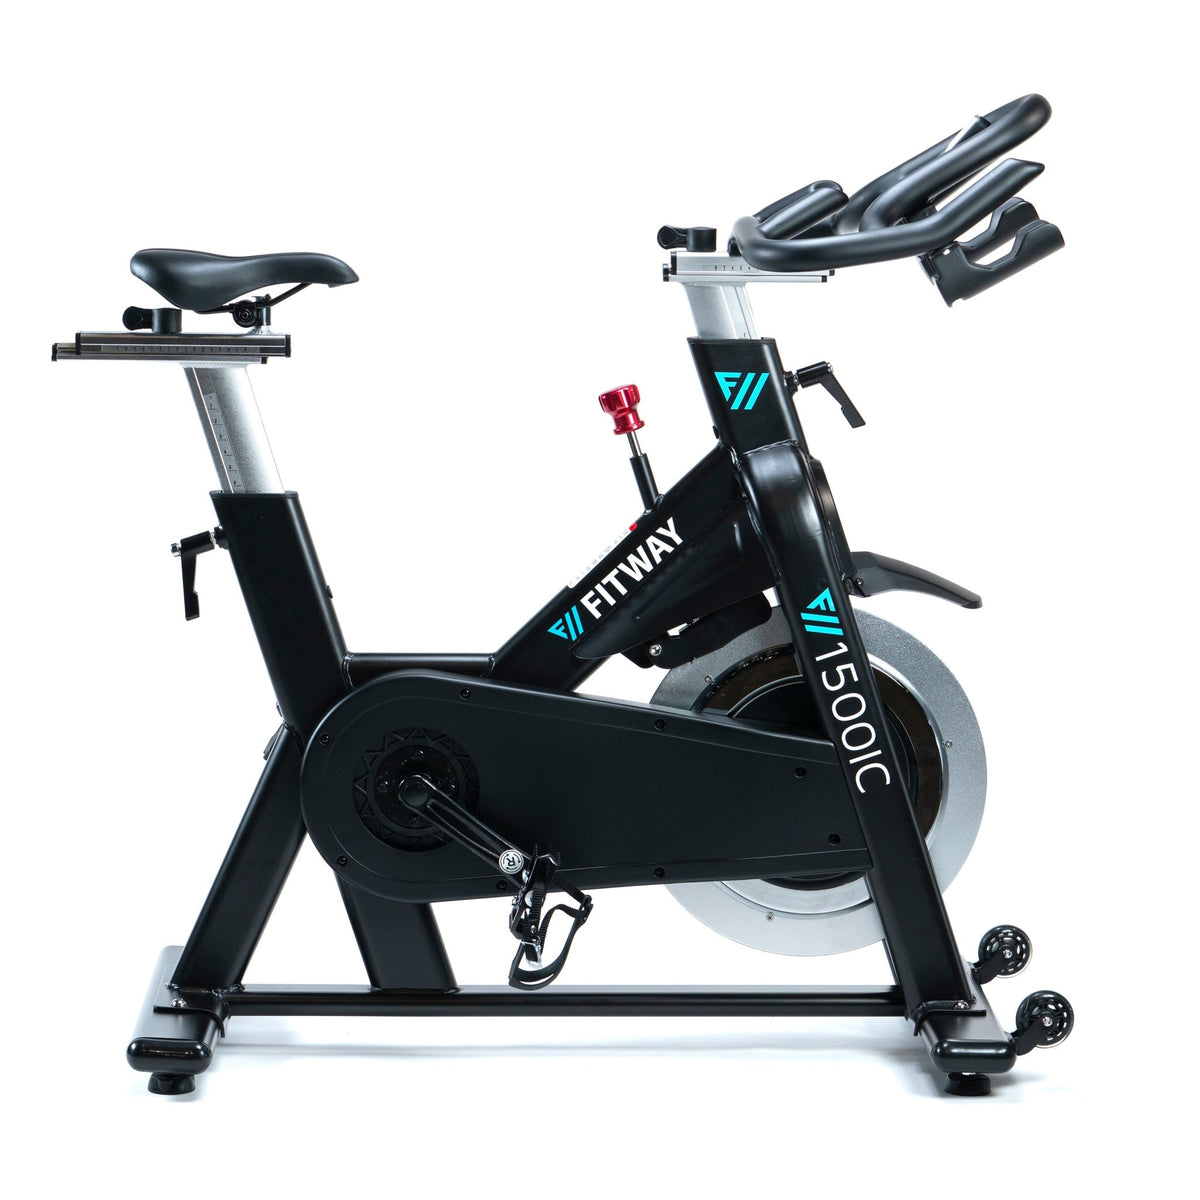 FitWay Equip. 1500IC Indoor Cycle - Angle 6